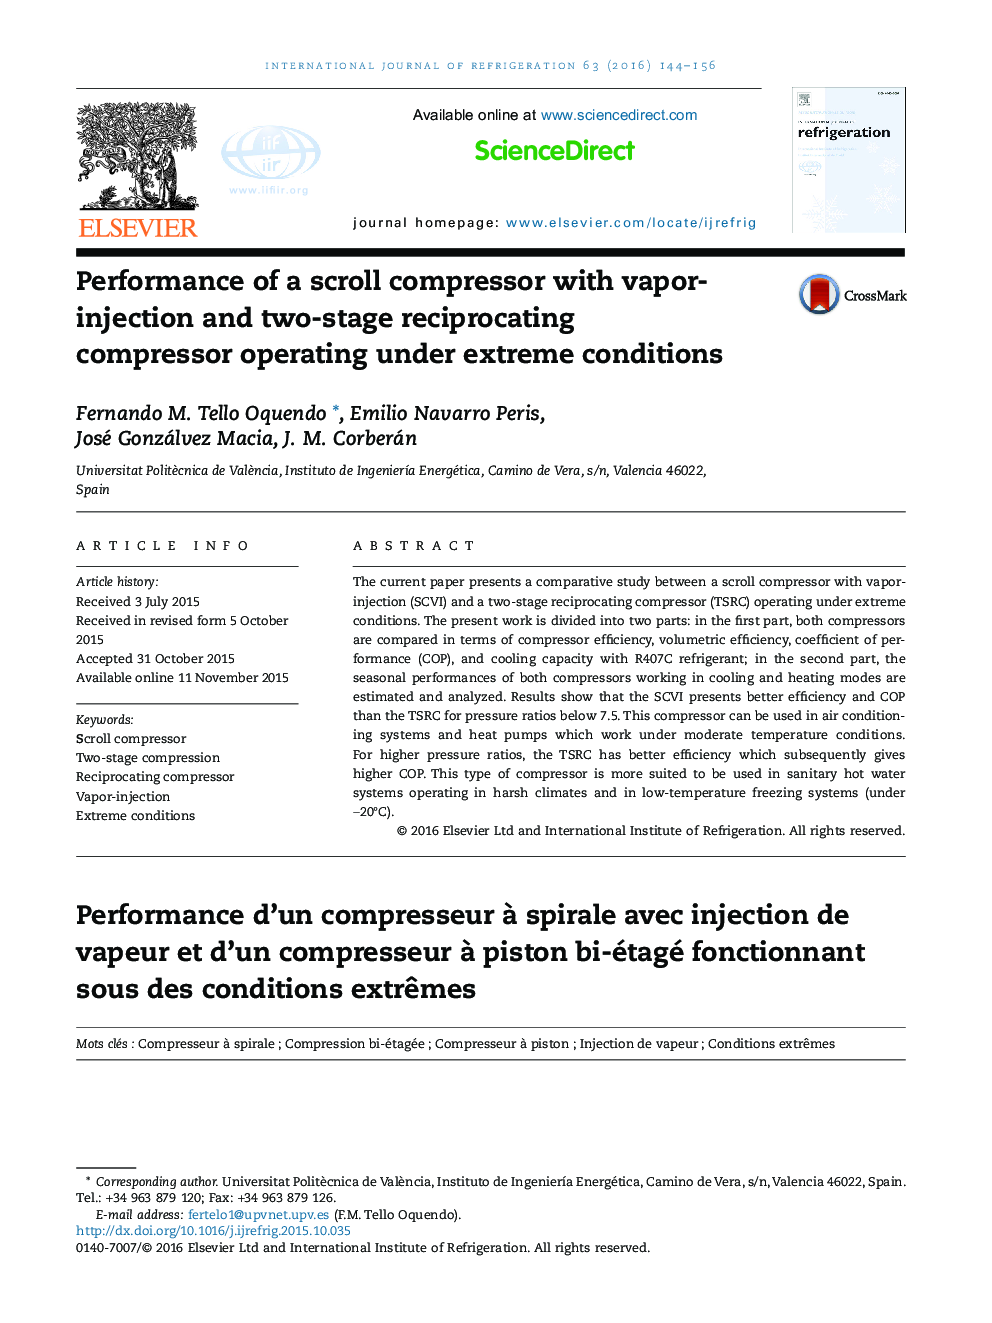 Performance of a scroll compressor with vapor-injection and two-stage reciprocating compressor operating under extreme conditions